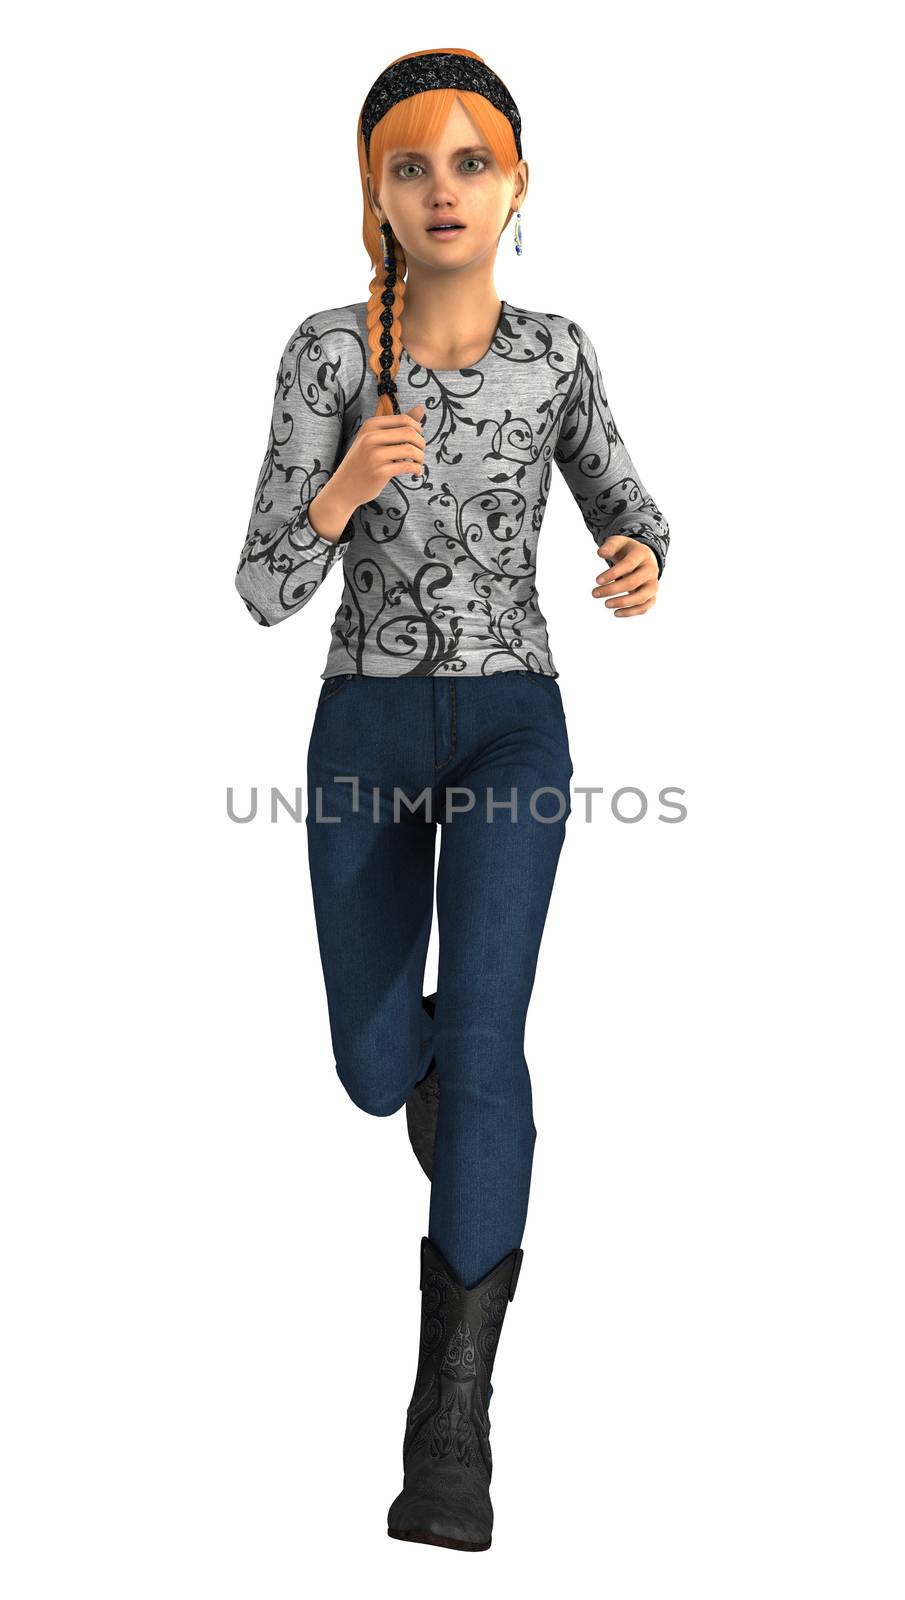 3D digital render of a running teenager girl isolated on white background